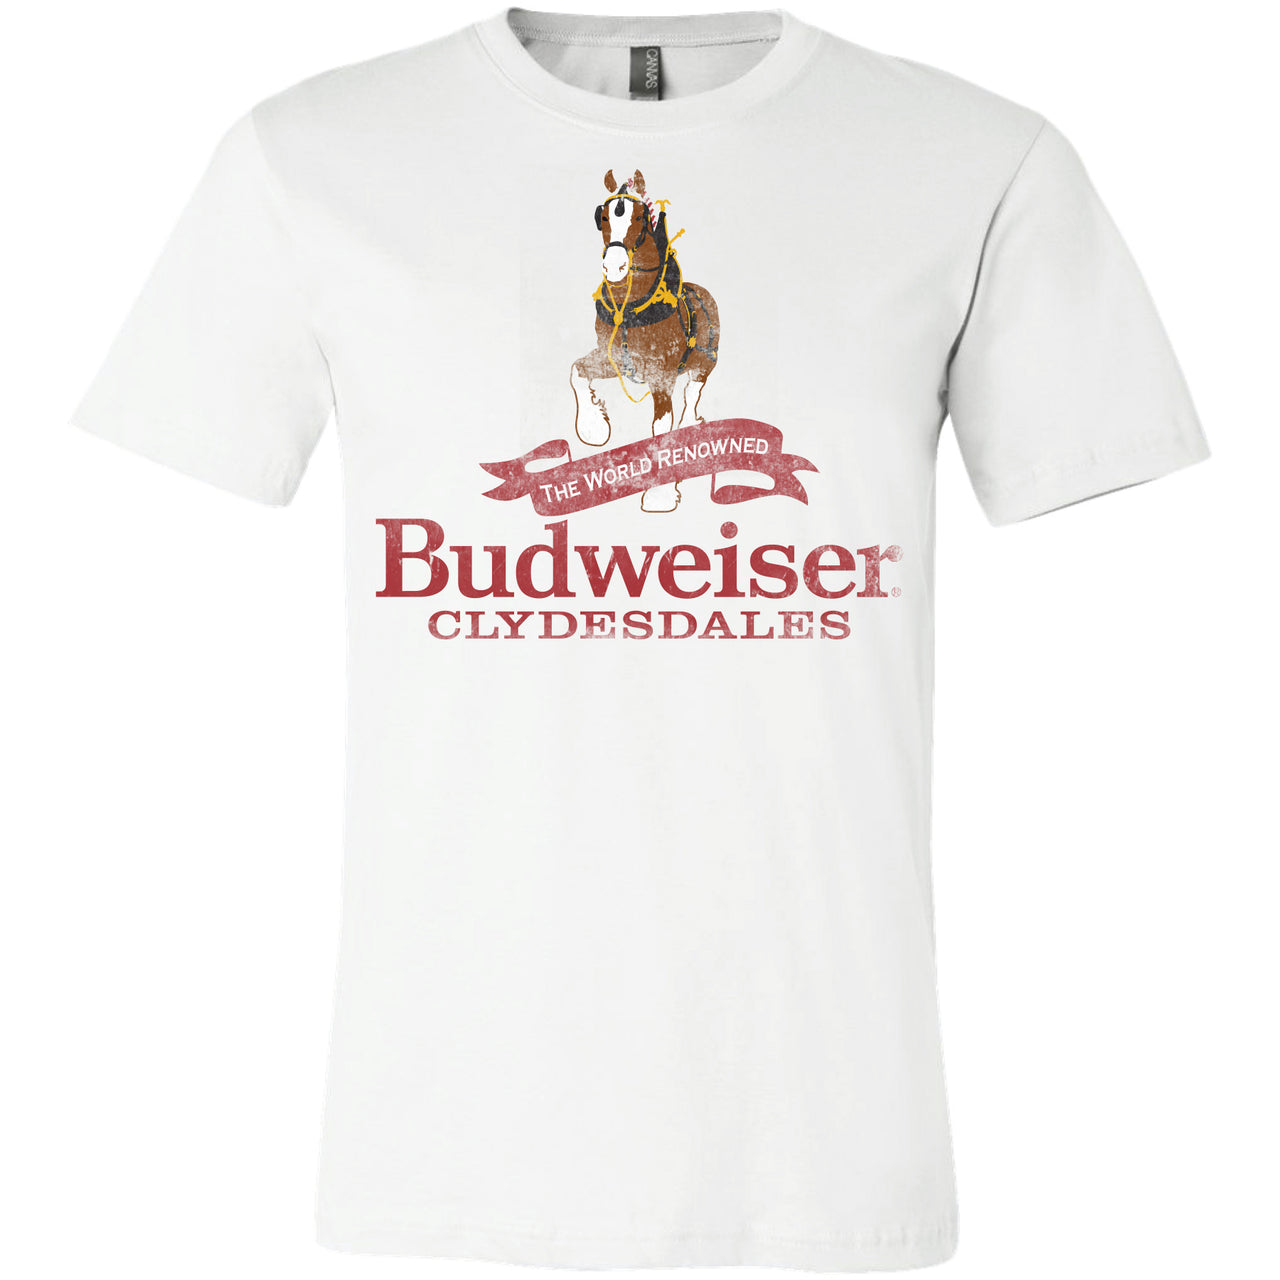 Budweiser Clydesdale - Illustration T-Shirt